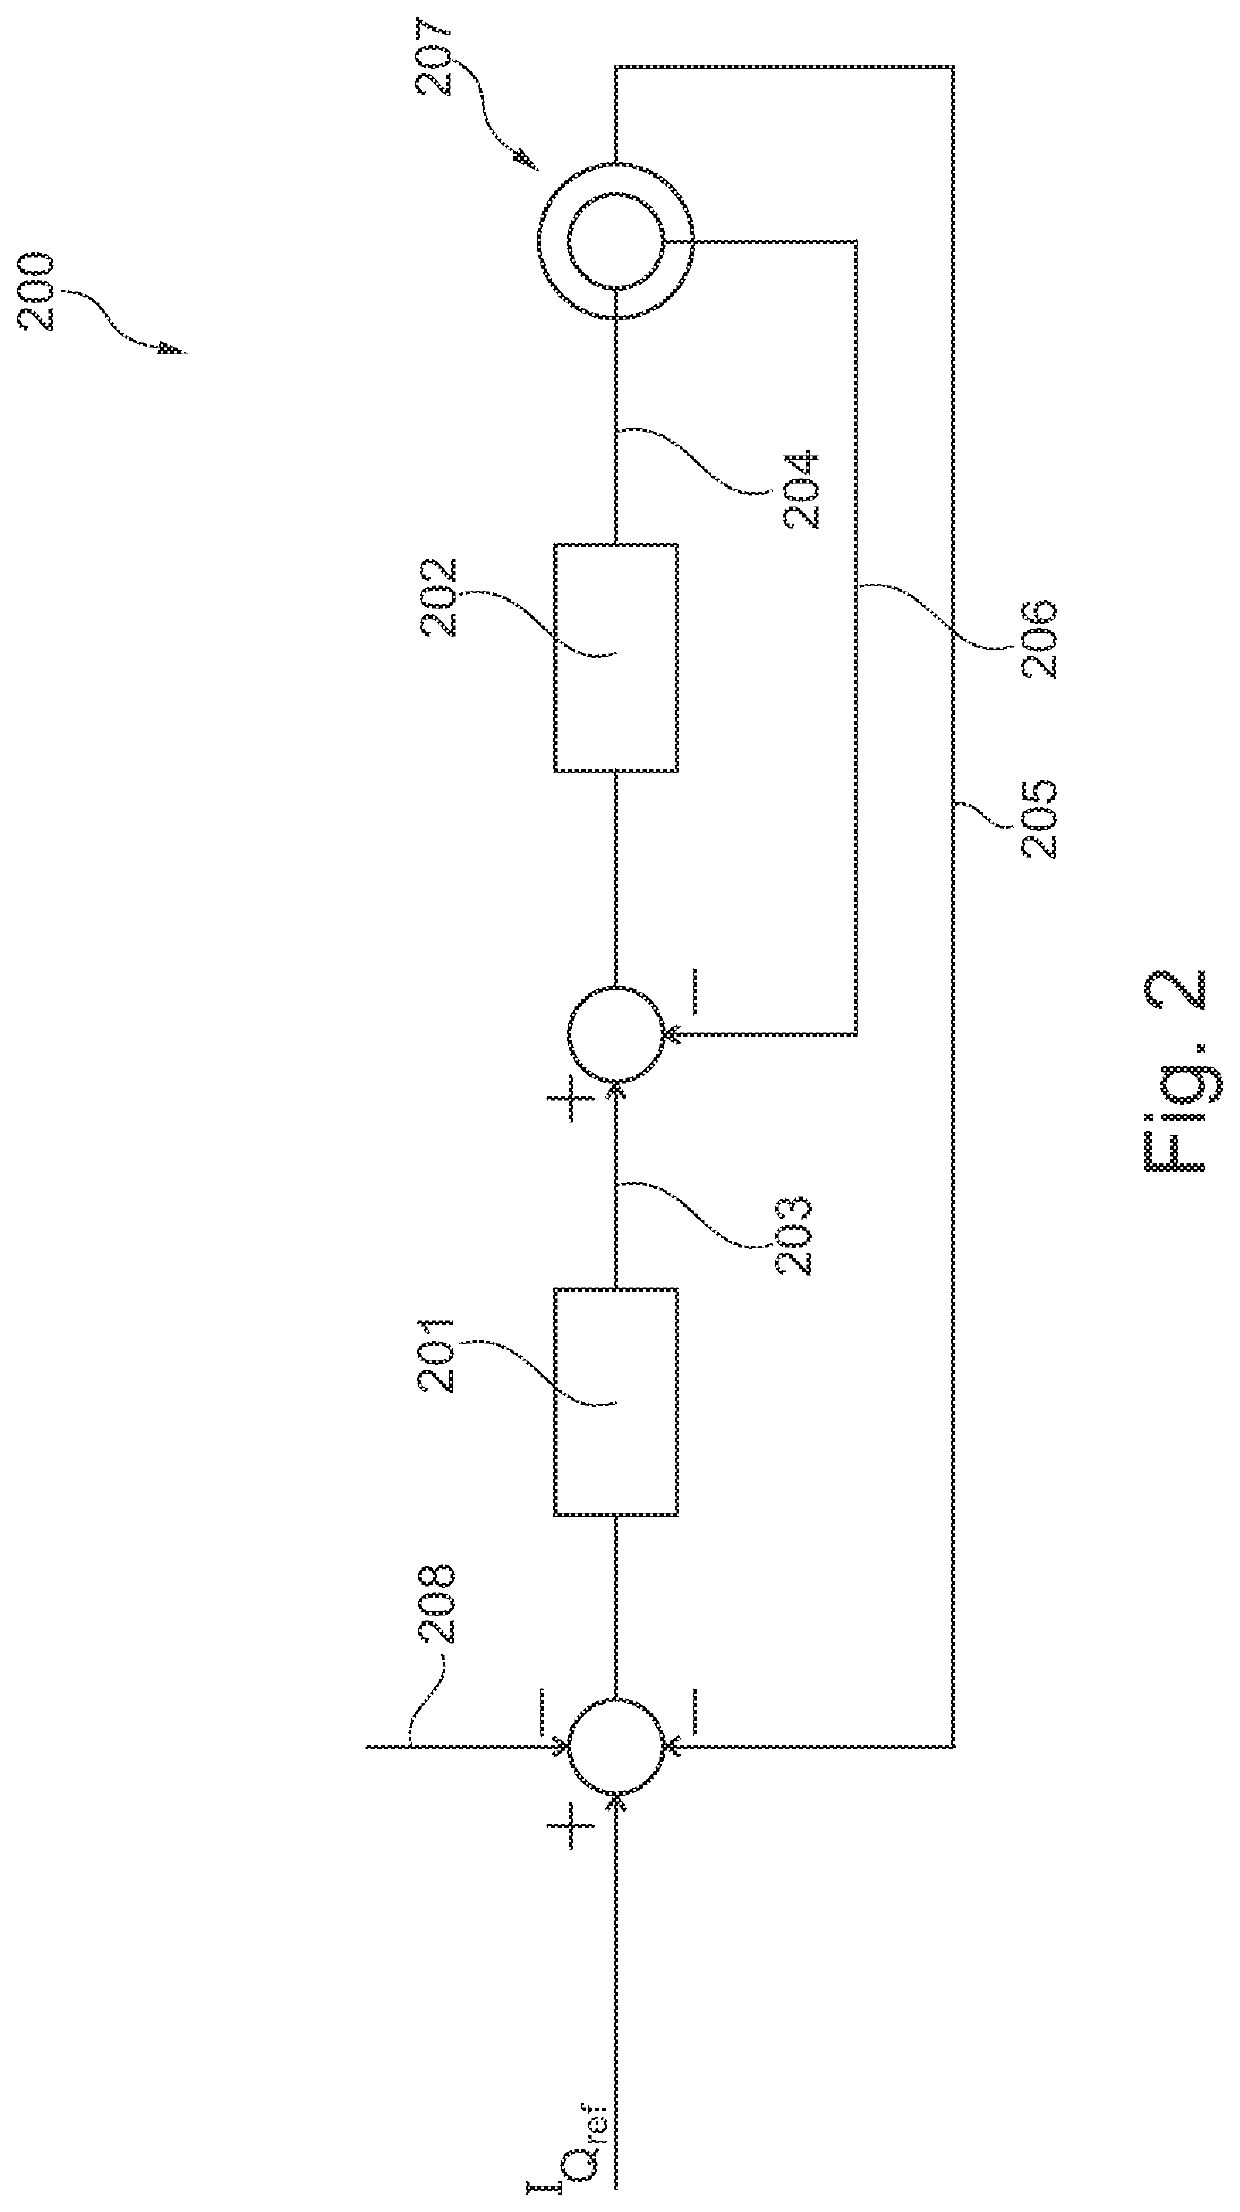 Balancing reactive current between a dfig stator and a grid-side inverter